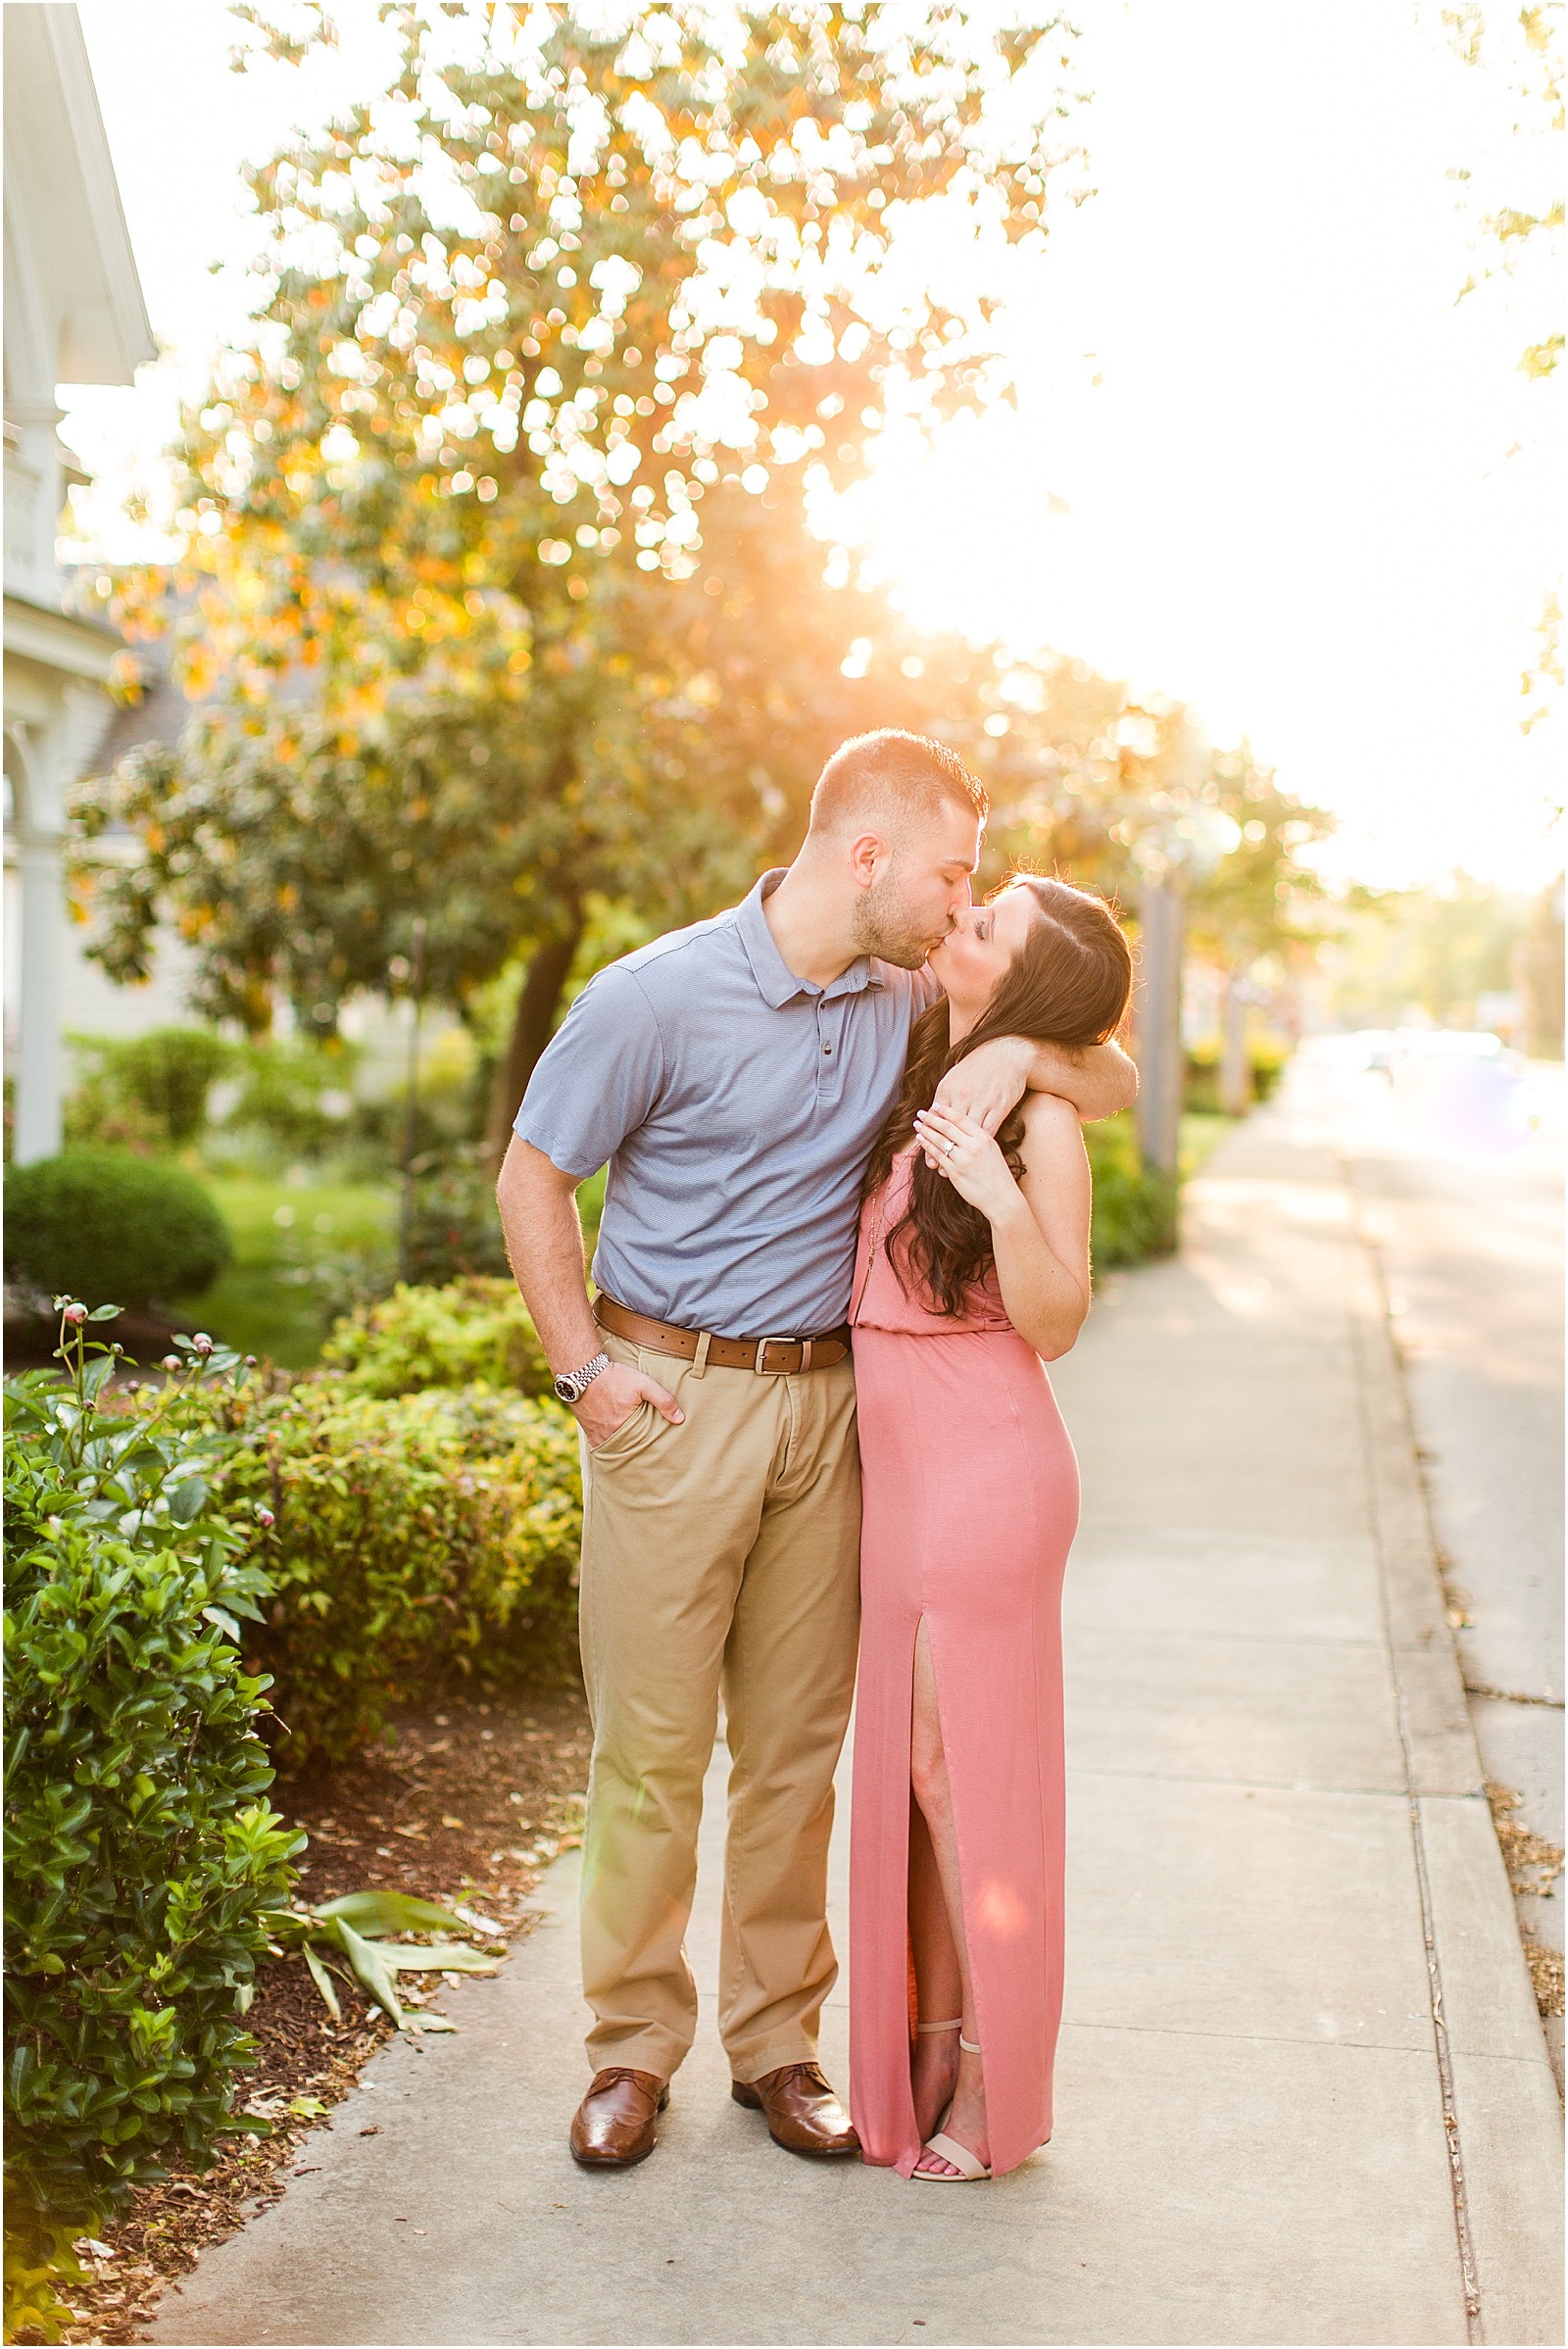 Downtown Newburgh Engagement Session | Matt and Blaire | Bret and Brandie Photography024.jpg